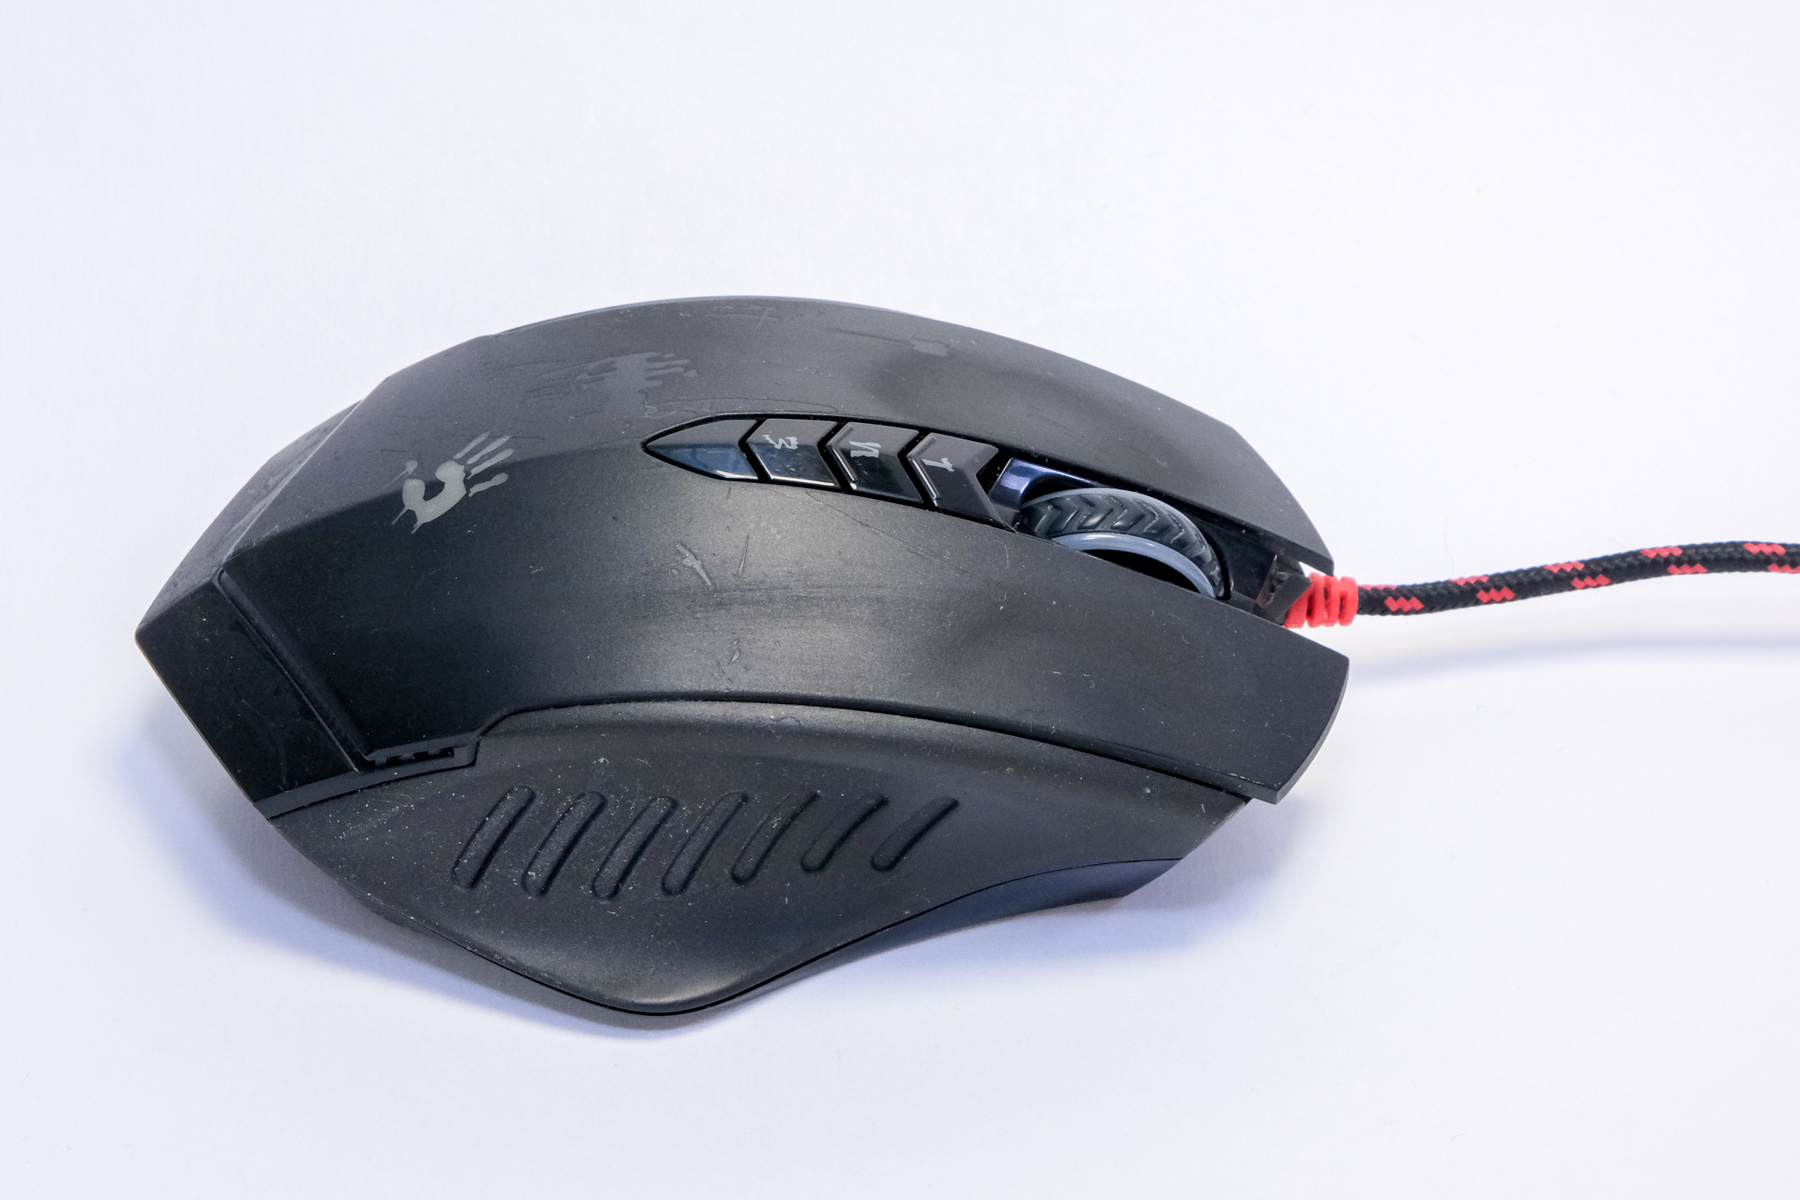 Blacklisted device bloody mouse a4tech rust решение disconnected фото 76